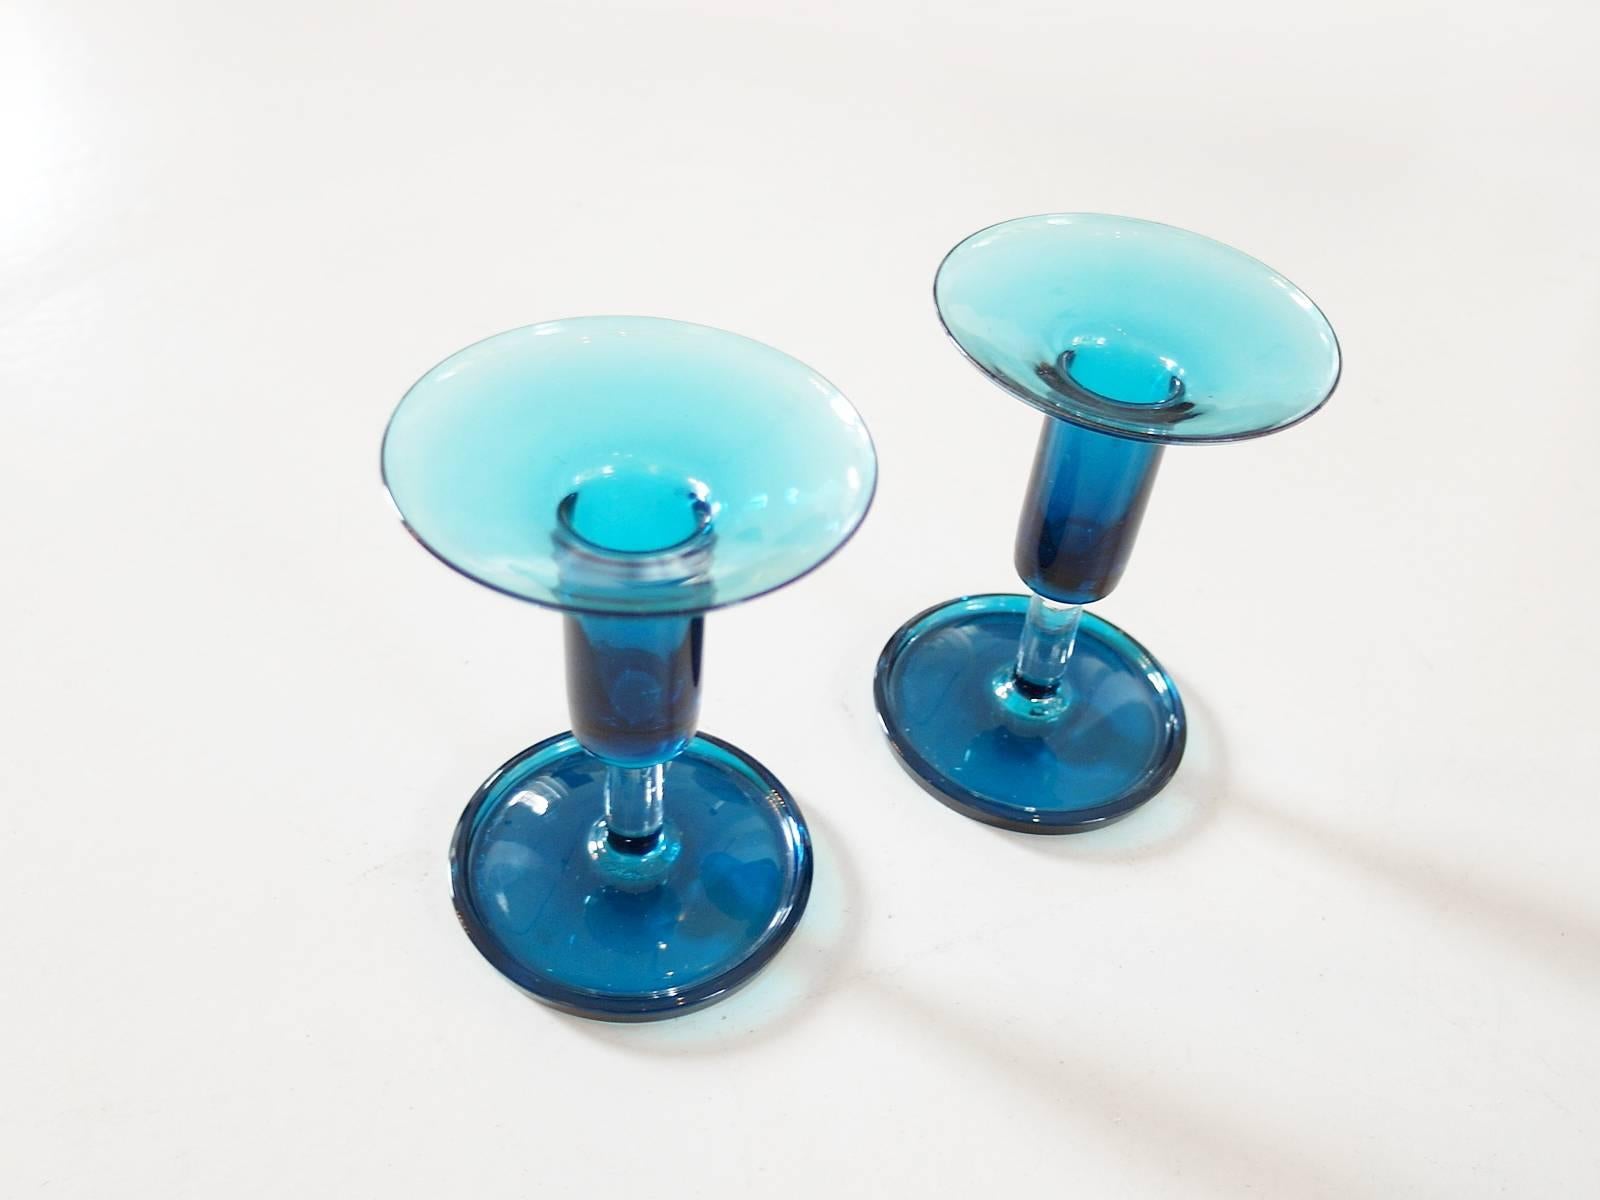 Mid-20th Century Pair of Signed Harlekiini Candleholders Designed by Nanny Still, Finland, 1964